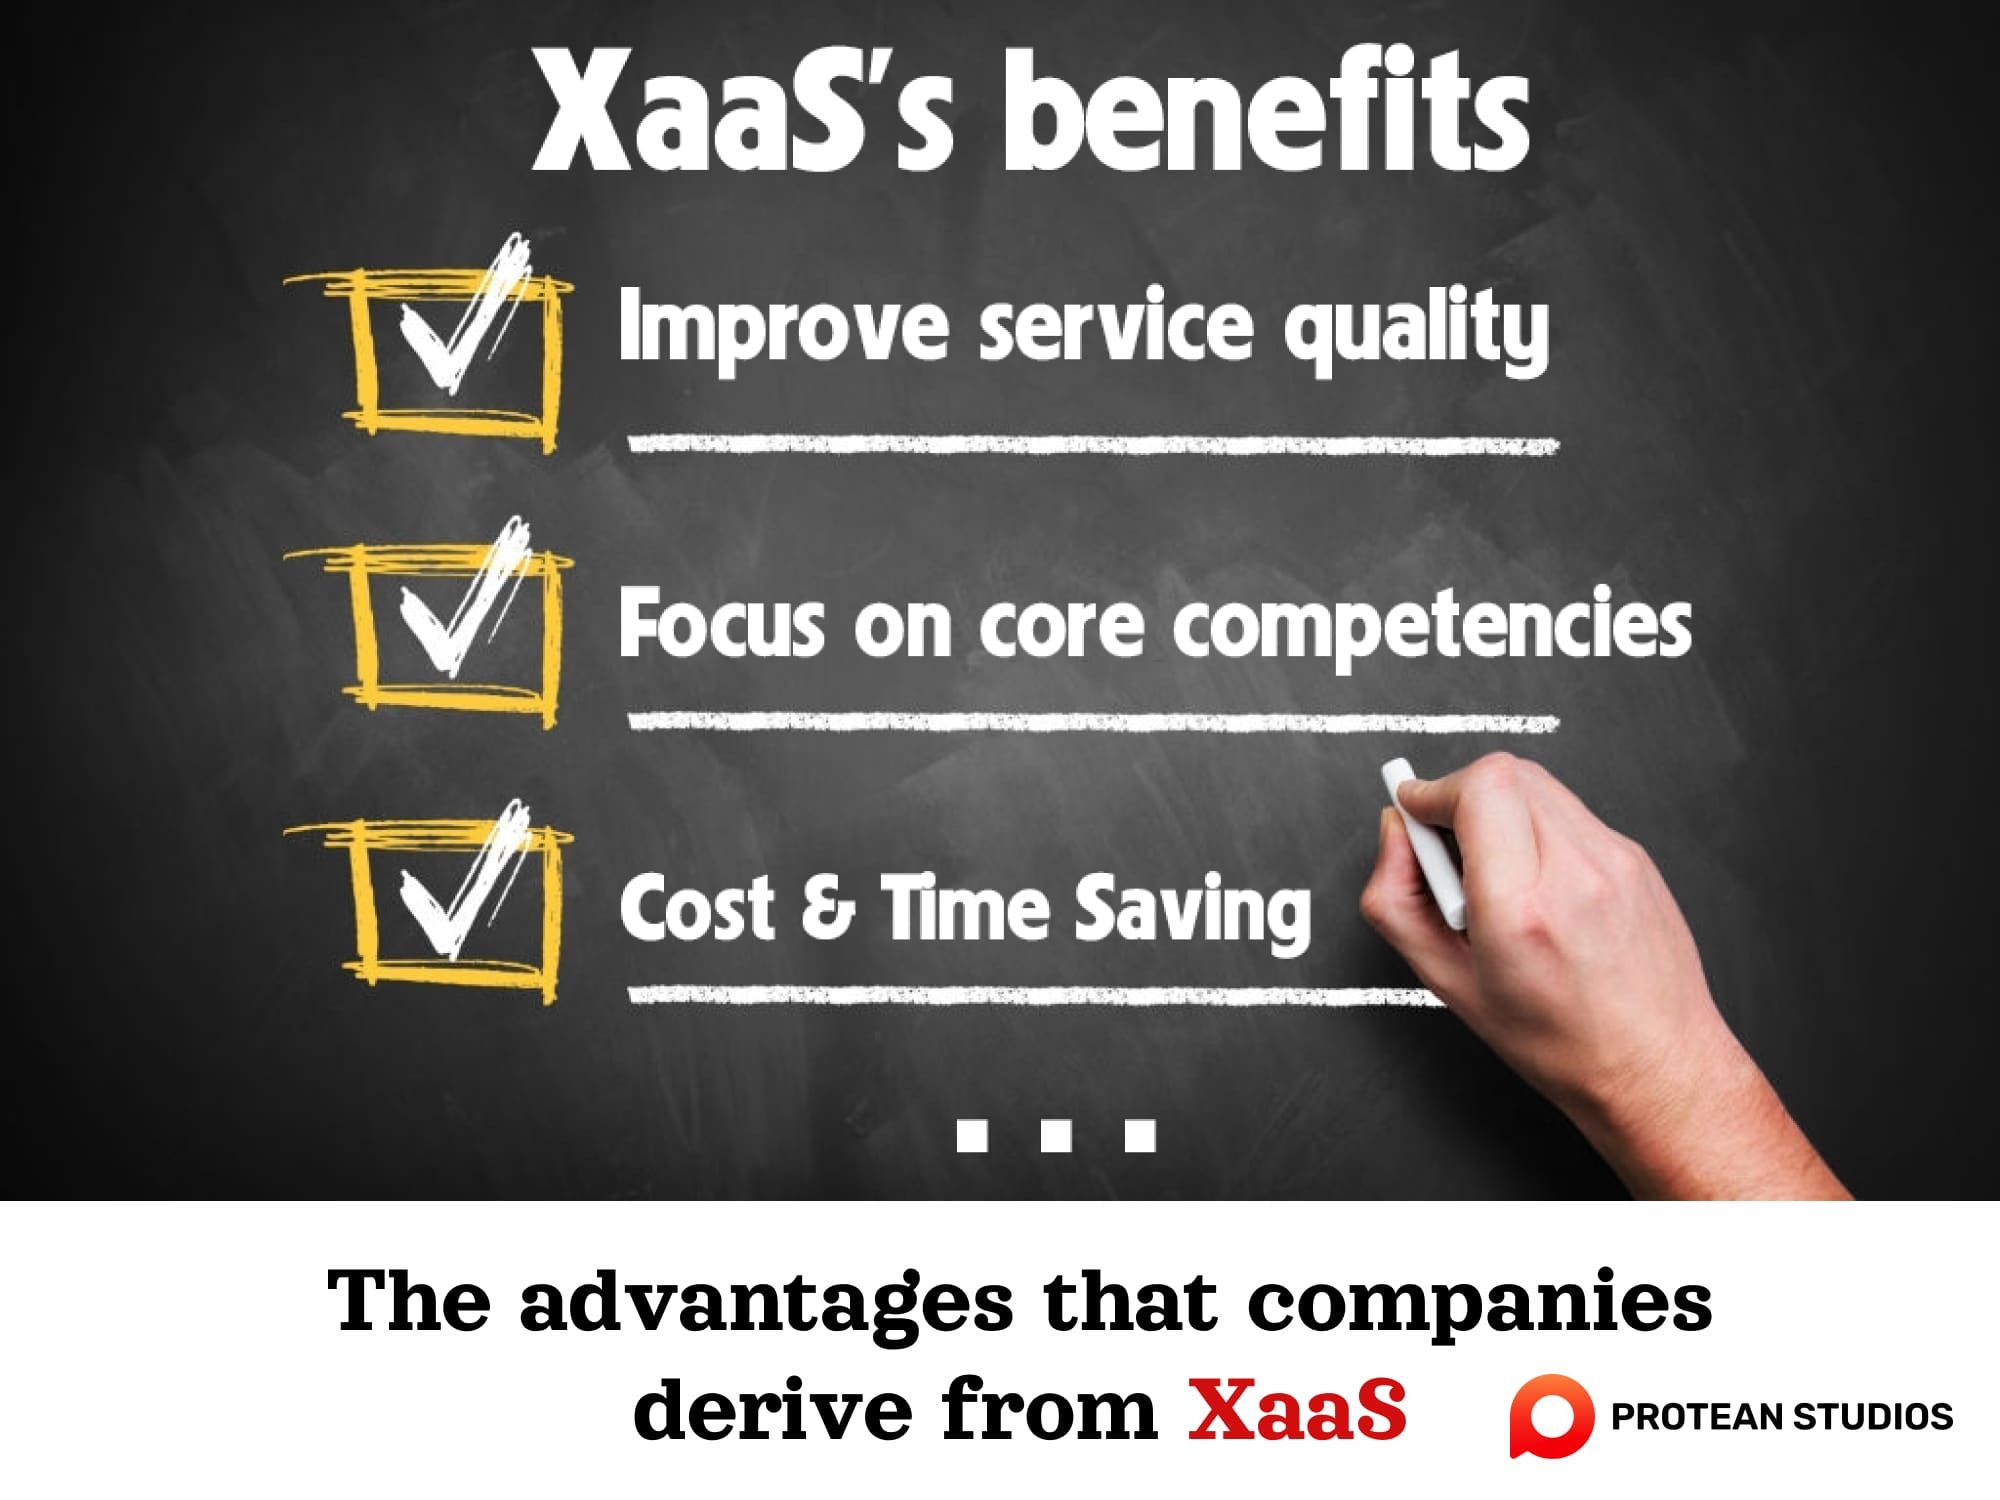 Advantages that companies benefit from XaaS